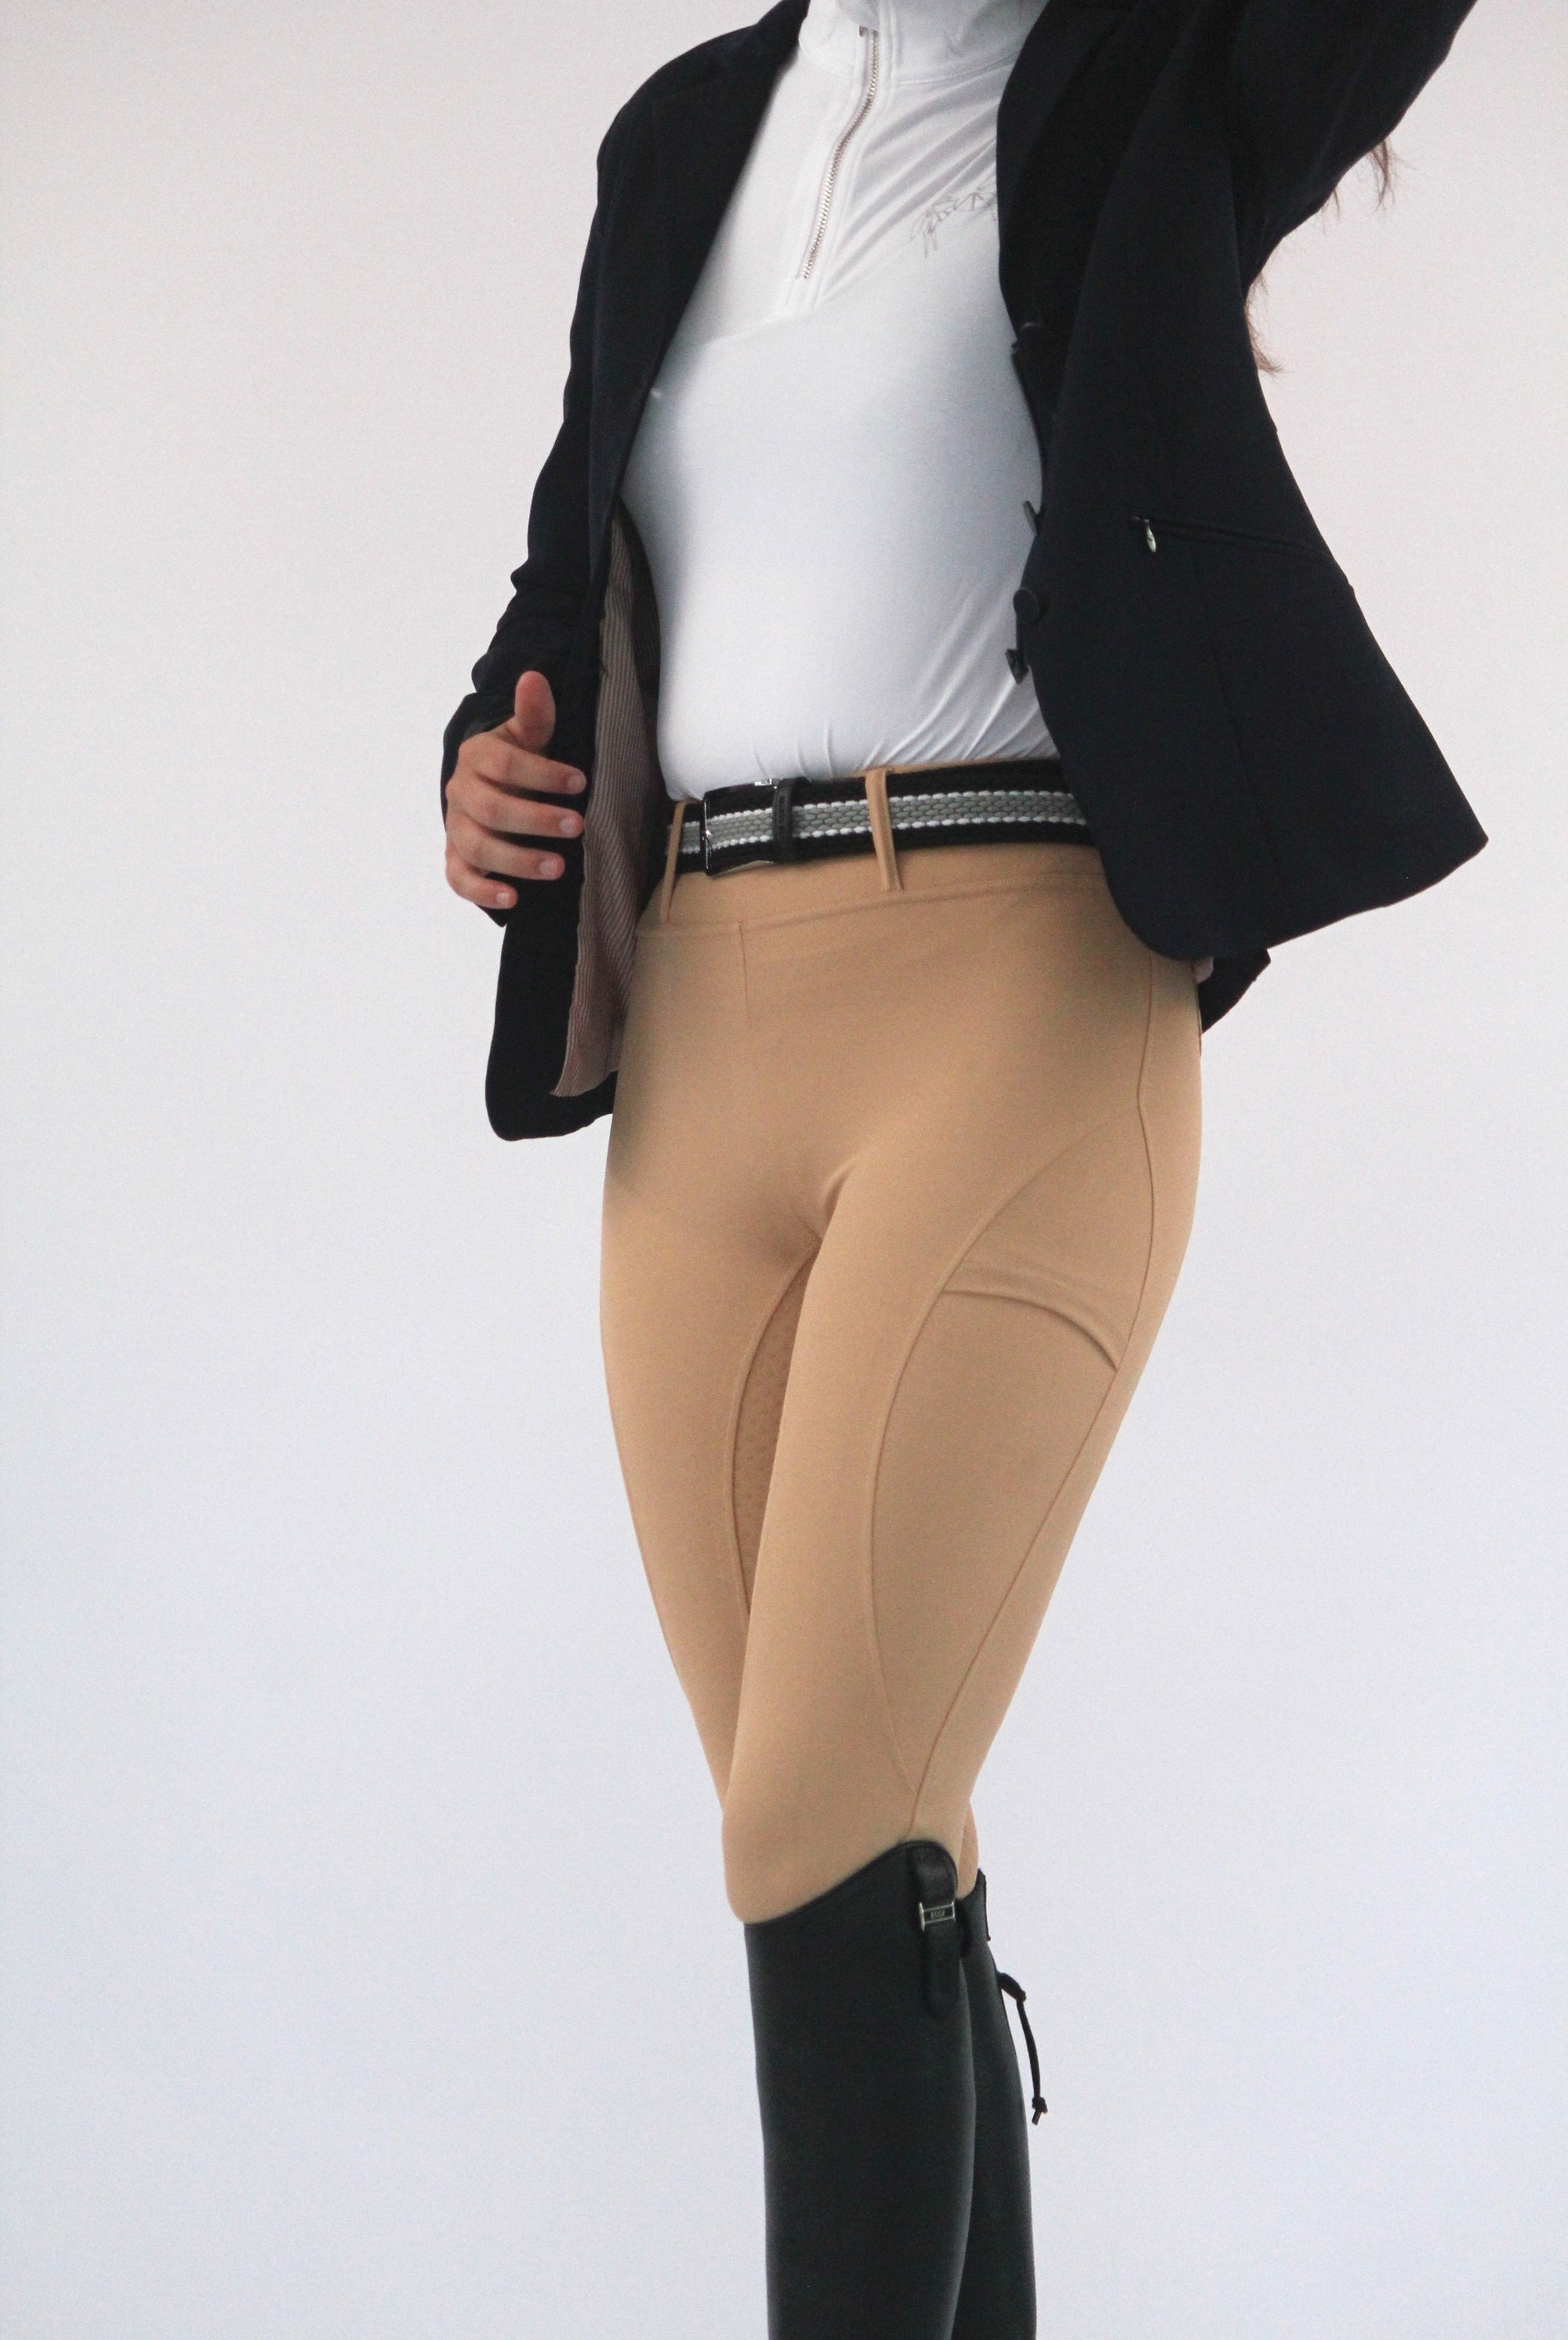 Stylish Equestrian competition outfit